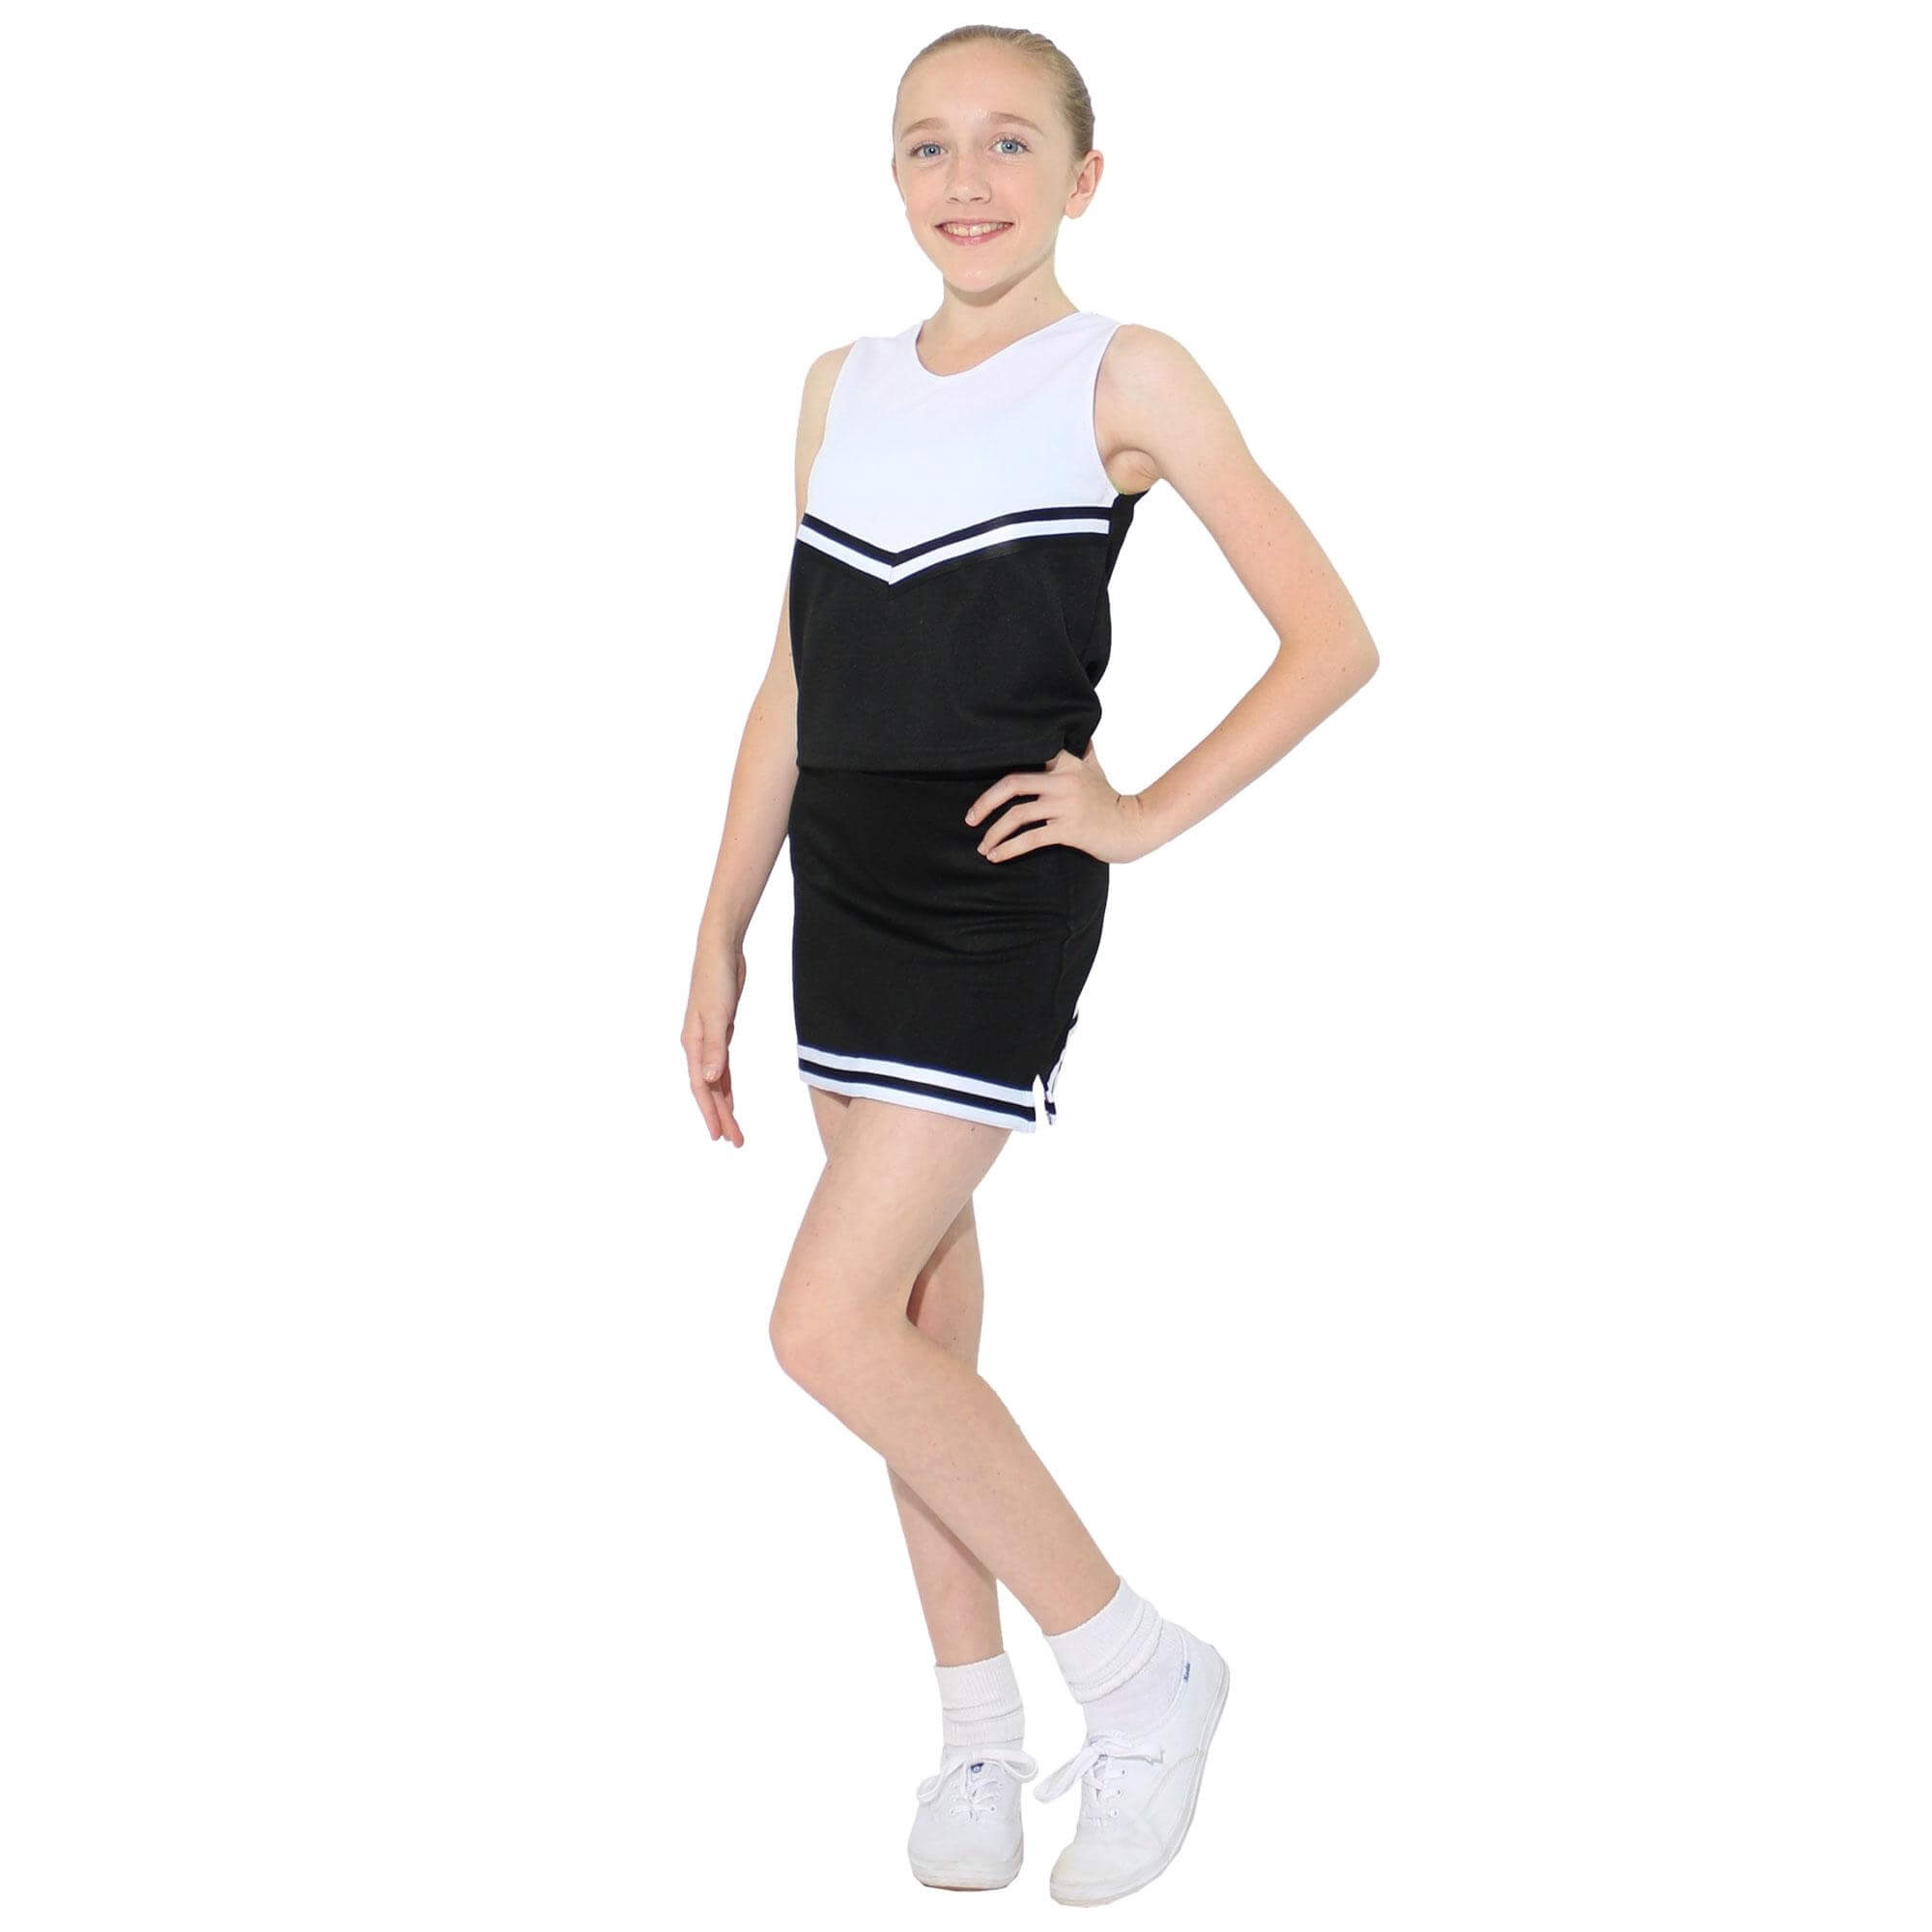 Danzcue Child A-Line Cheerleading Skirt - Click Image to Close